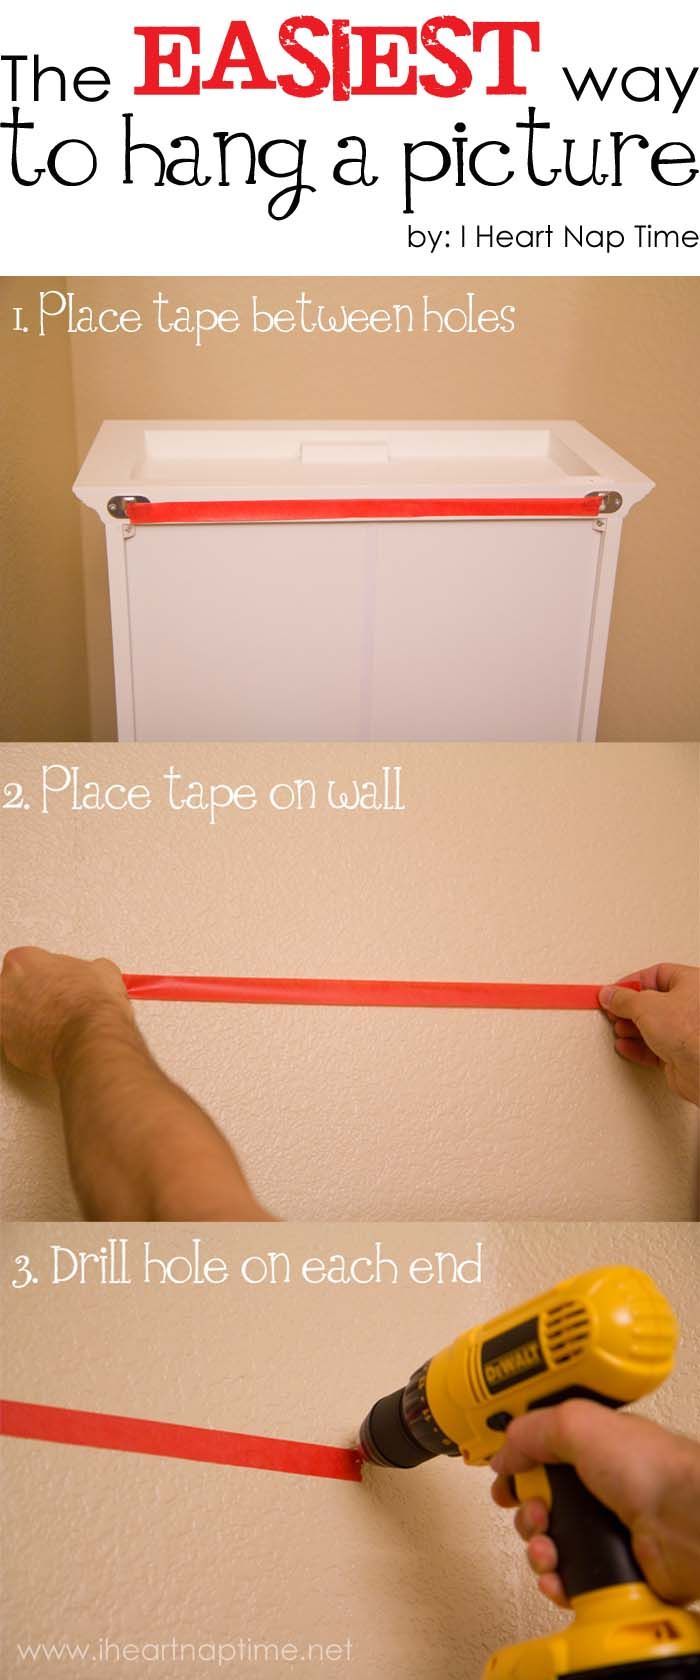 The easiest way to hang a picture! Why didnt I think of this? I have seen a lot